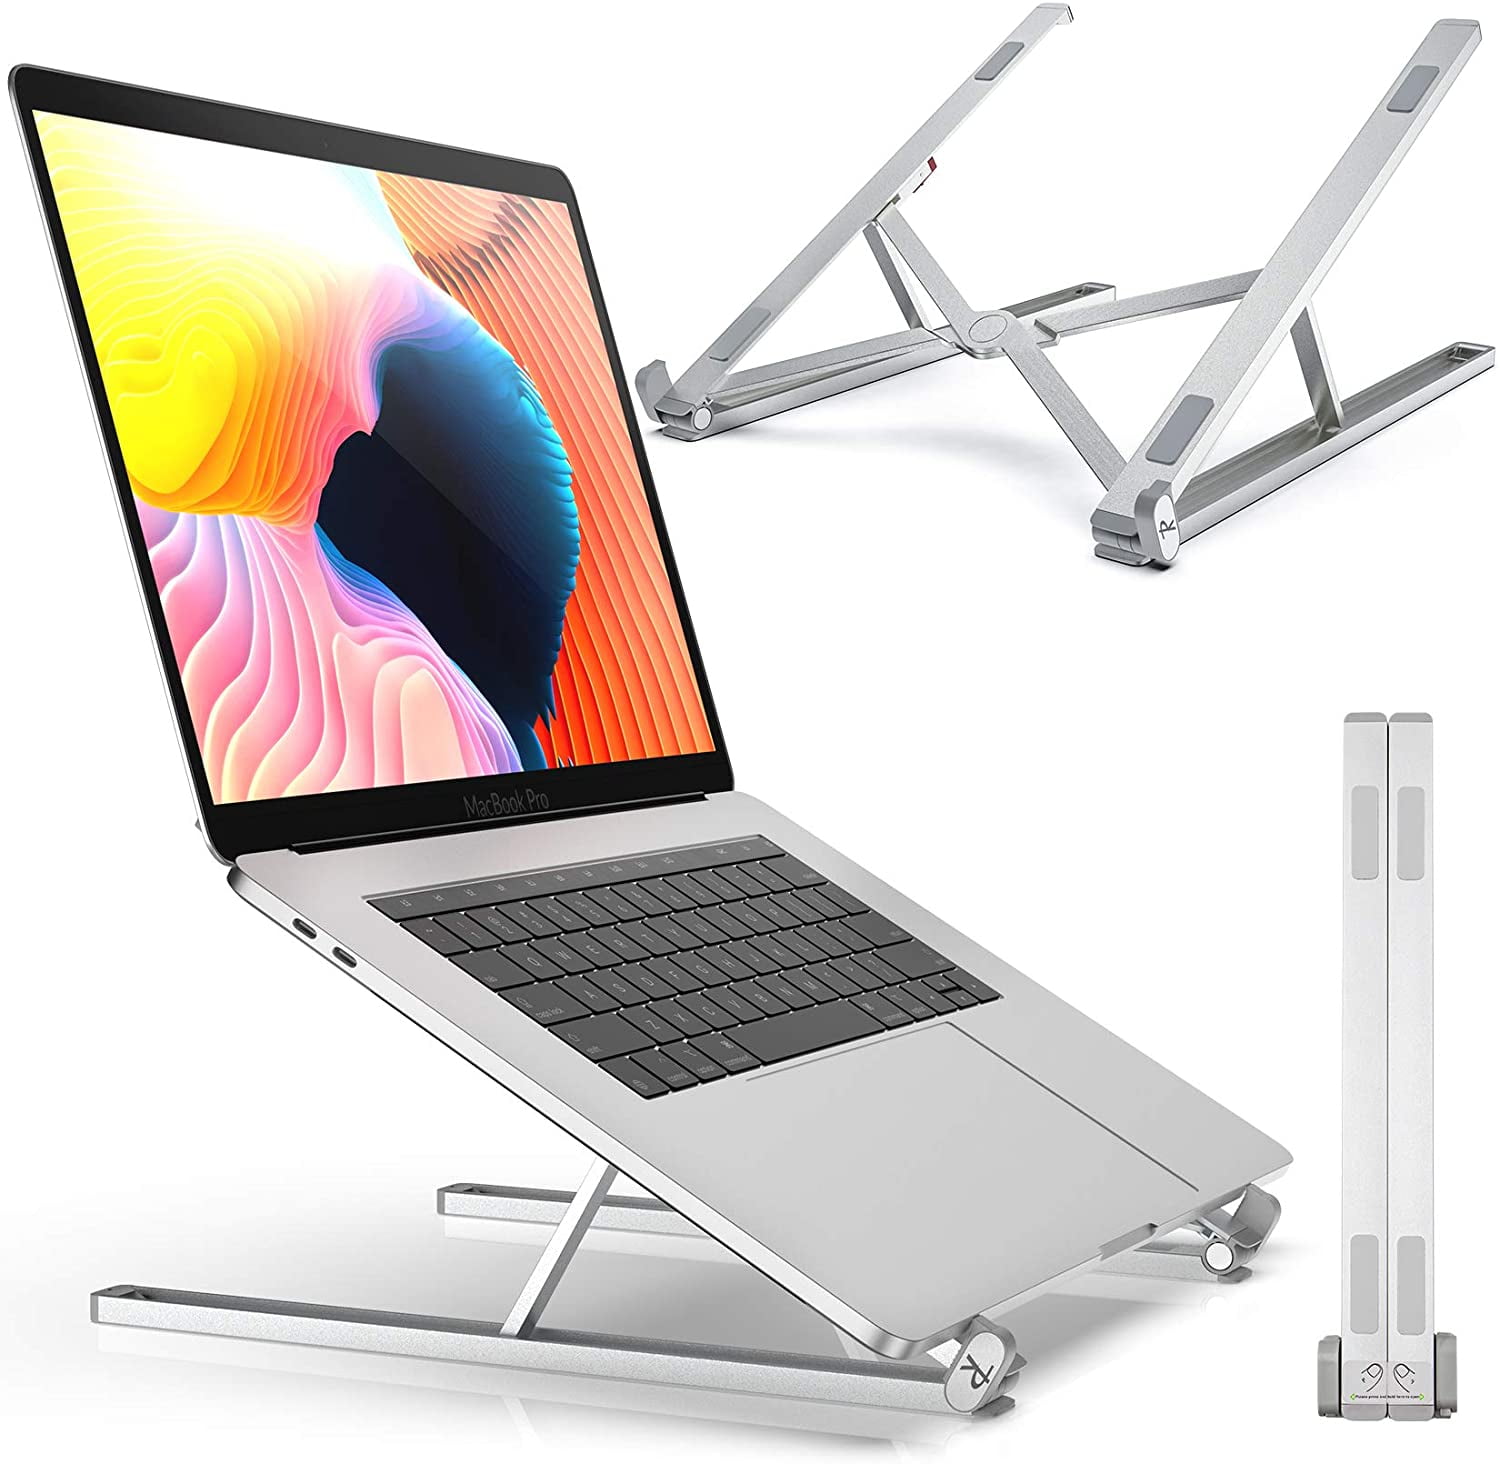 Laptop Stand Laptop Riser Stand Portable Adjustable Aluminium Alloy Laptop Stand Foldable Ventilated for MacBook and Notebook Black 